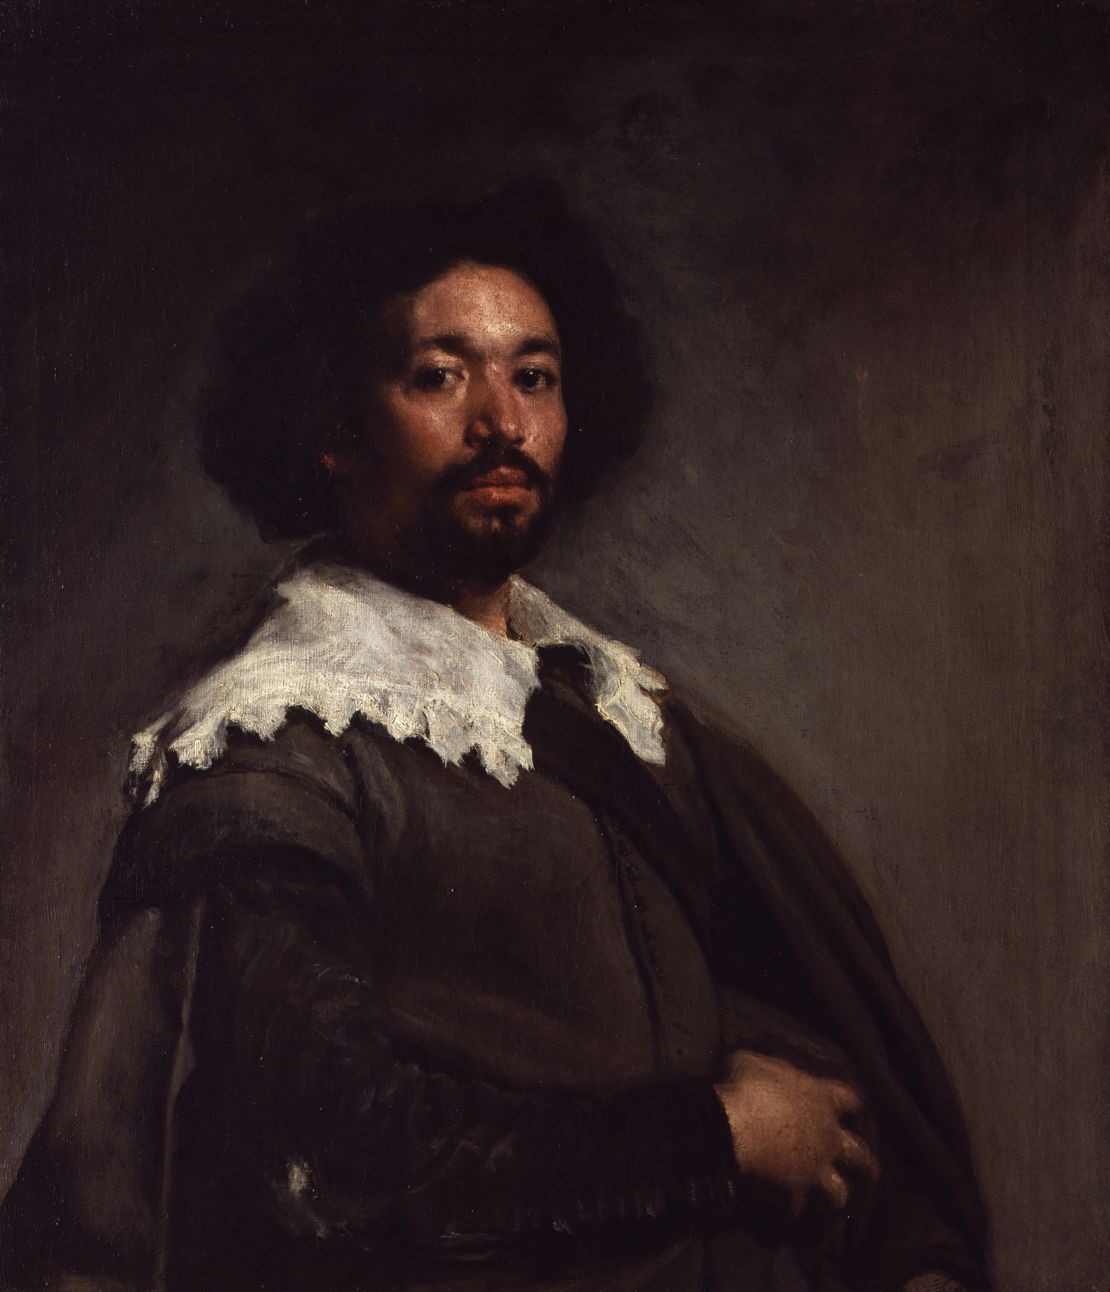 Juan de Pareja became "instantly famous" in this portrait by Diego Velázquez, while he was still enslaved.